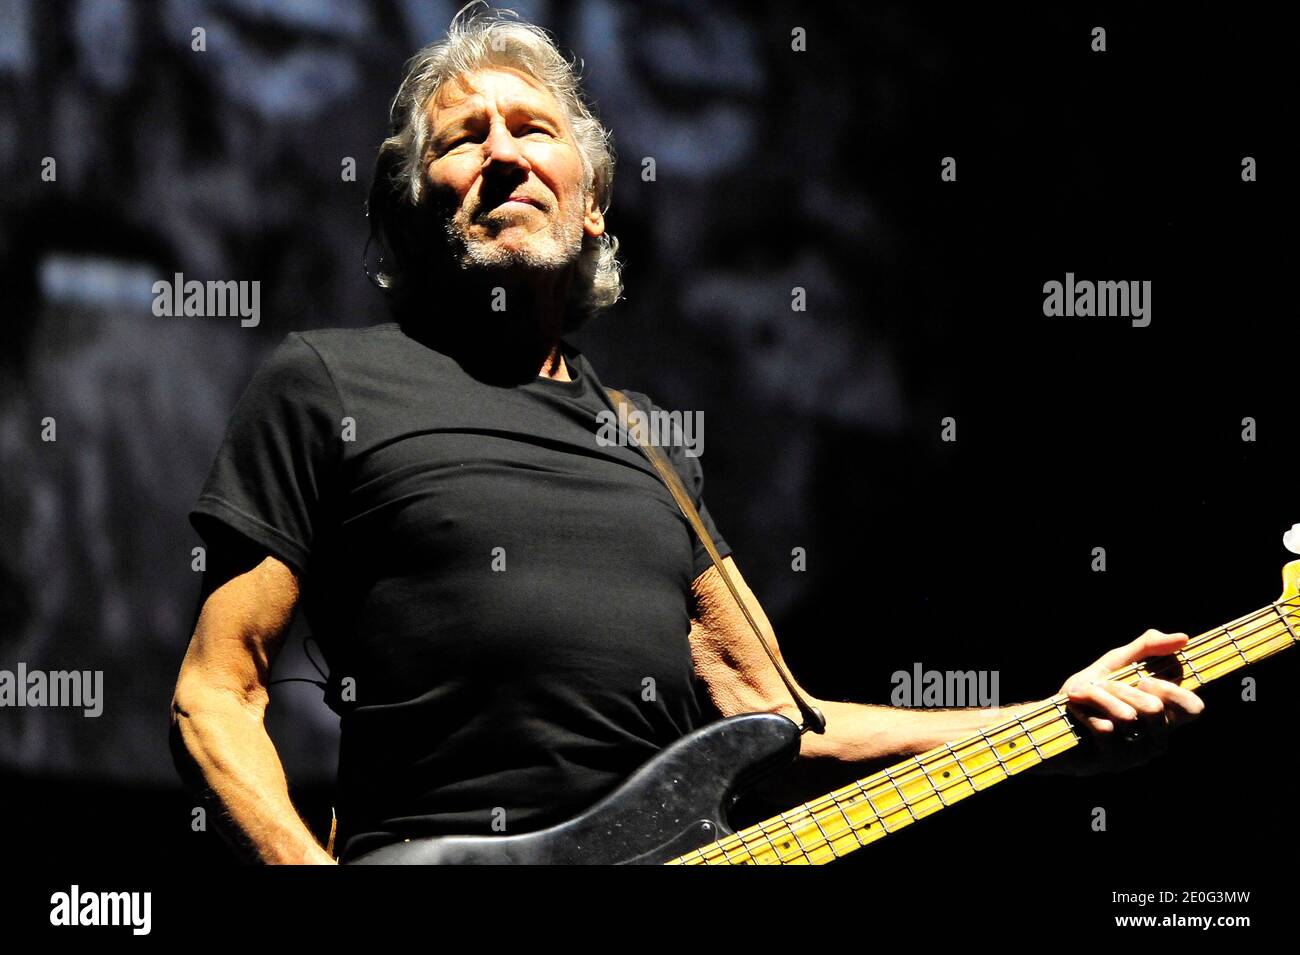 Roger Waters from Pink Floyd, along with guitarist G.E. Smith, perform Pink Flloyd's classic song 'The Wall' at a soldout show at Wrigley Field in Chicago, IL, USA on June 08, 2012. Photo by Cindy Barrymore/ABACAPRESS.COM Stock Photo